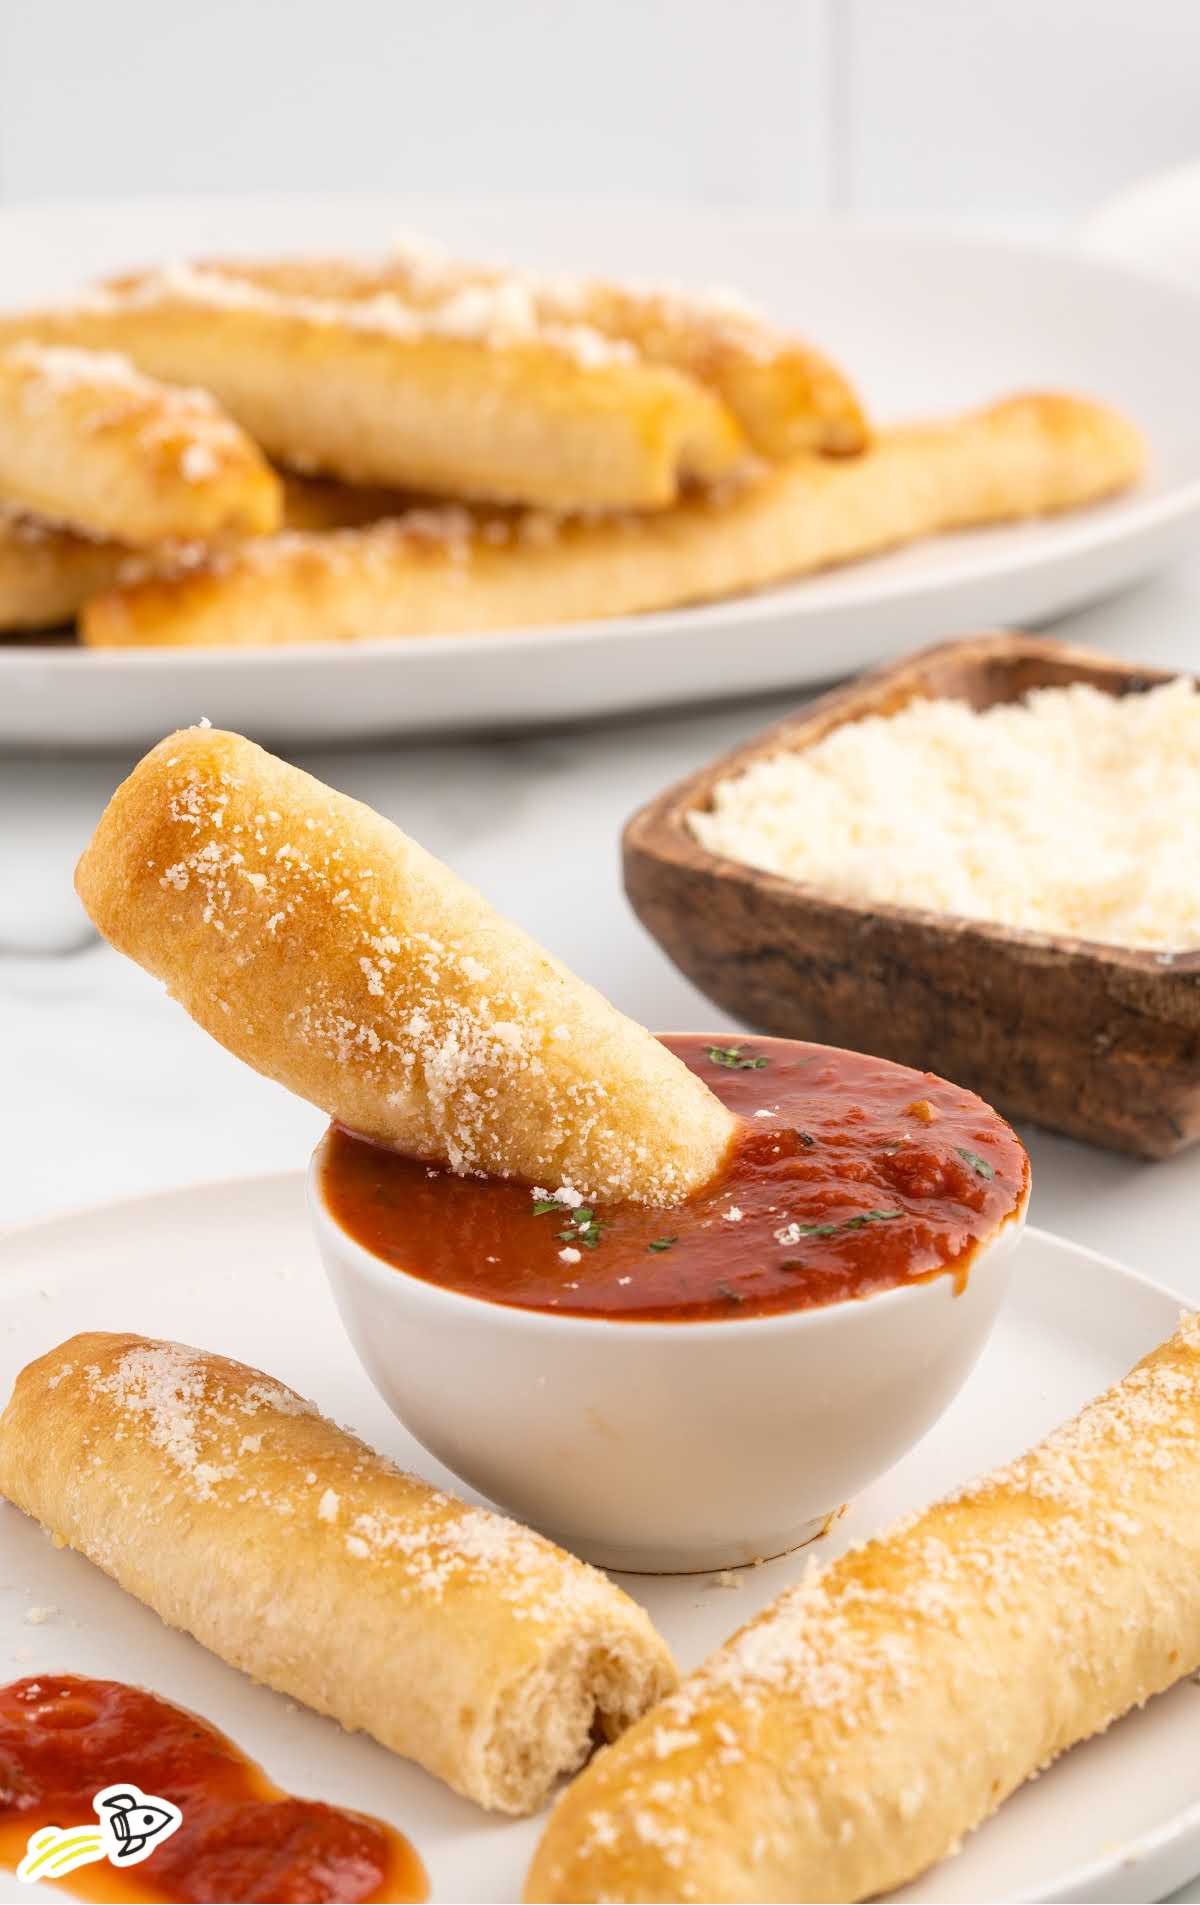 a breadstick dipped into a bowl of marinara sauce